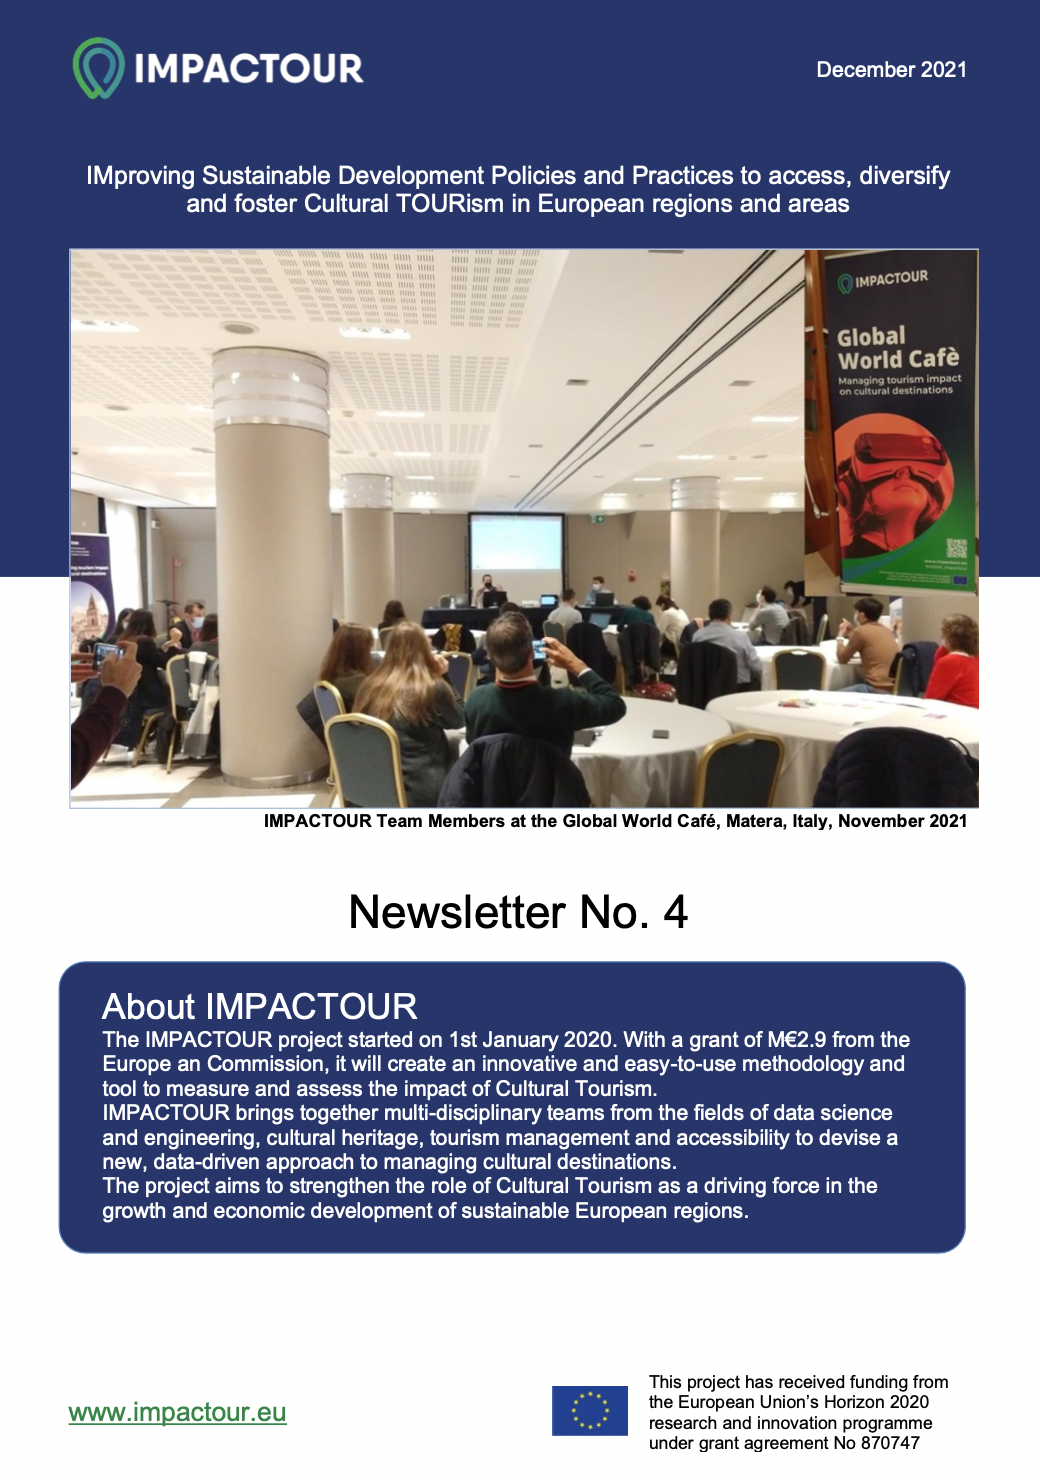 image of Newsletter no. 4 cover showing Matera Global World Café meeting room